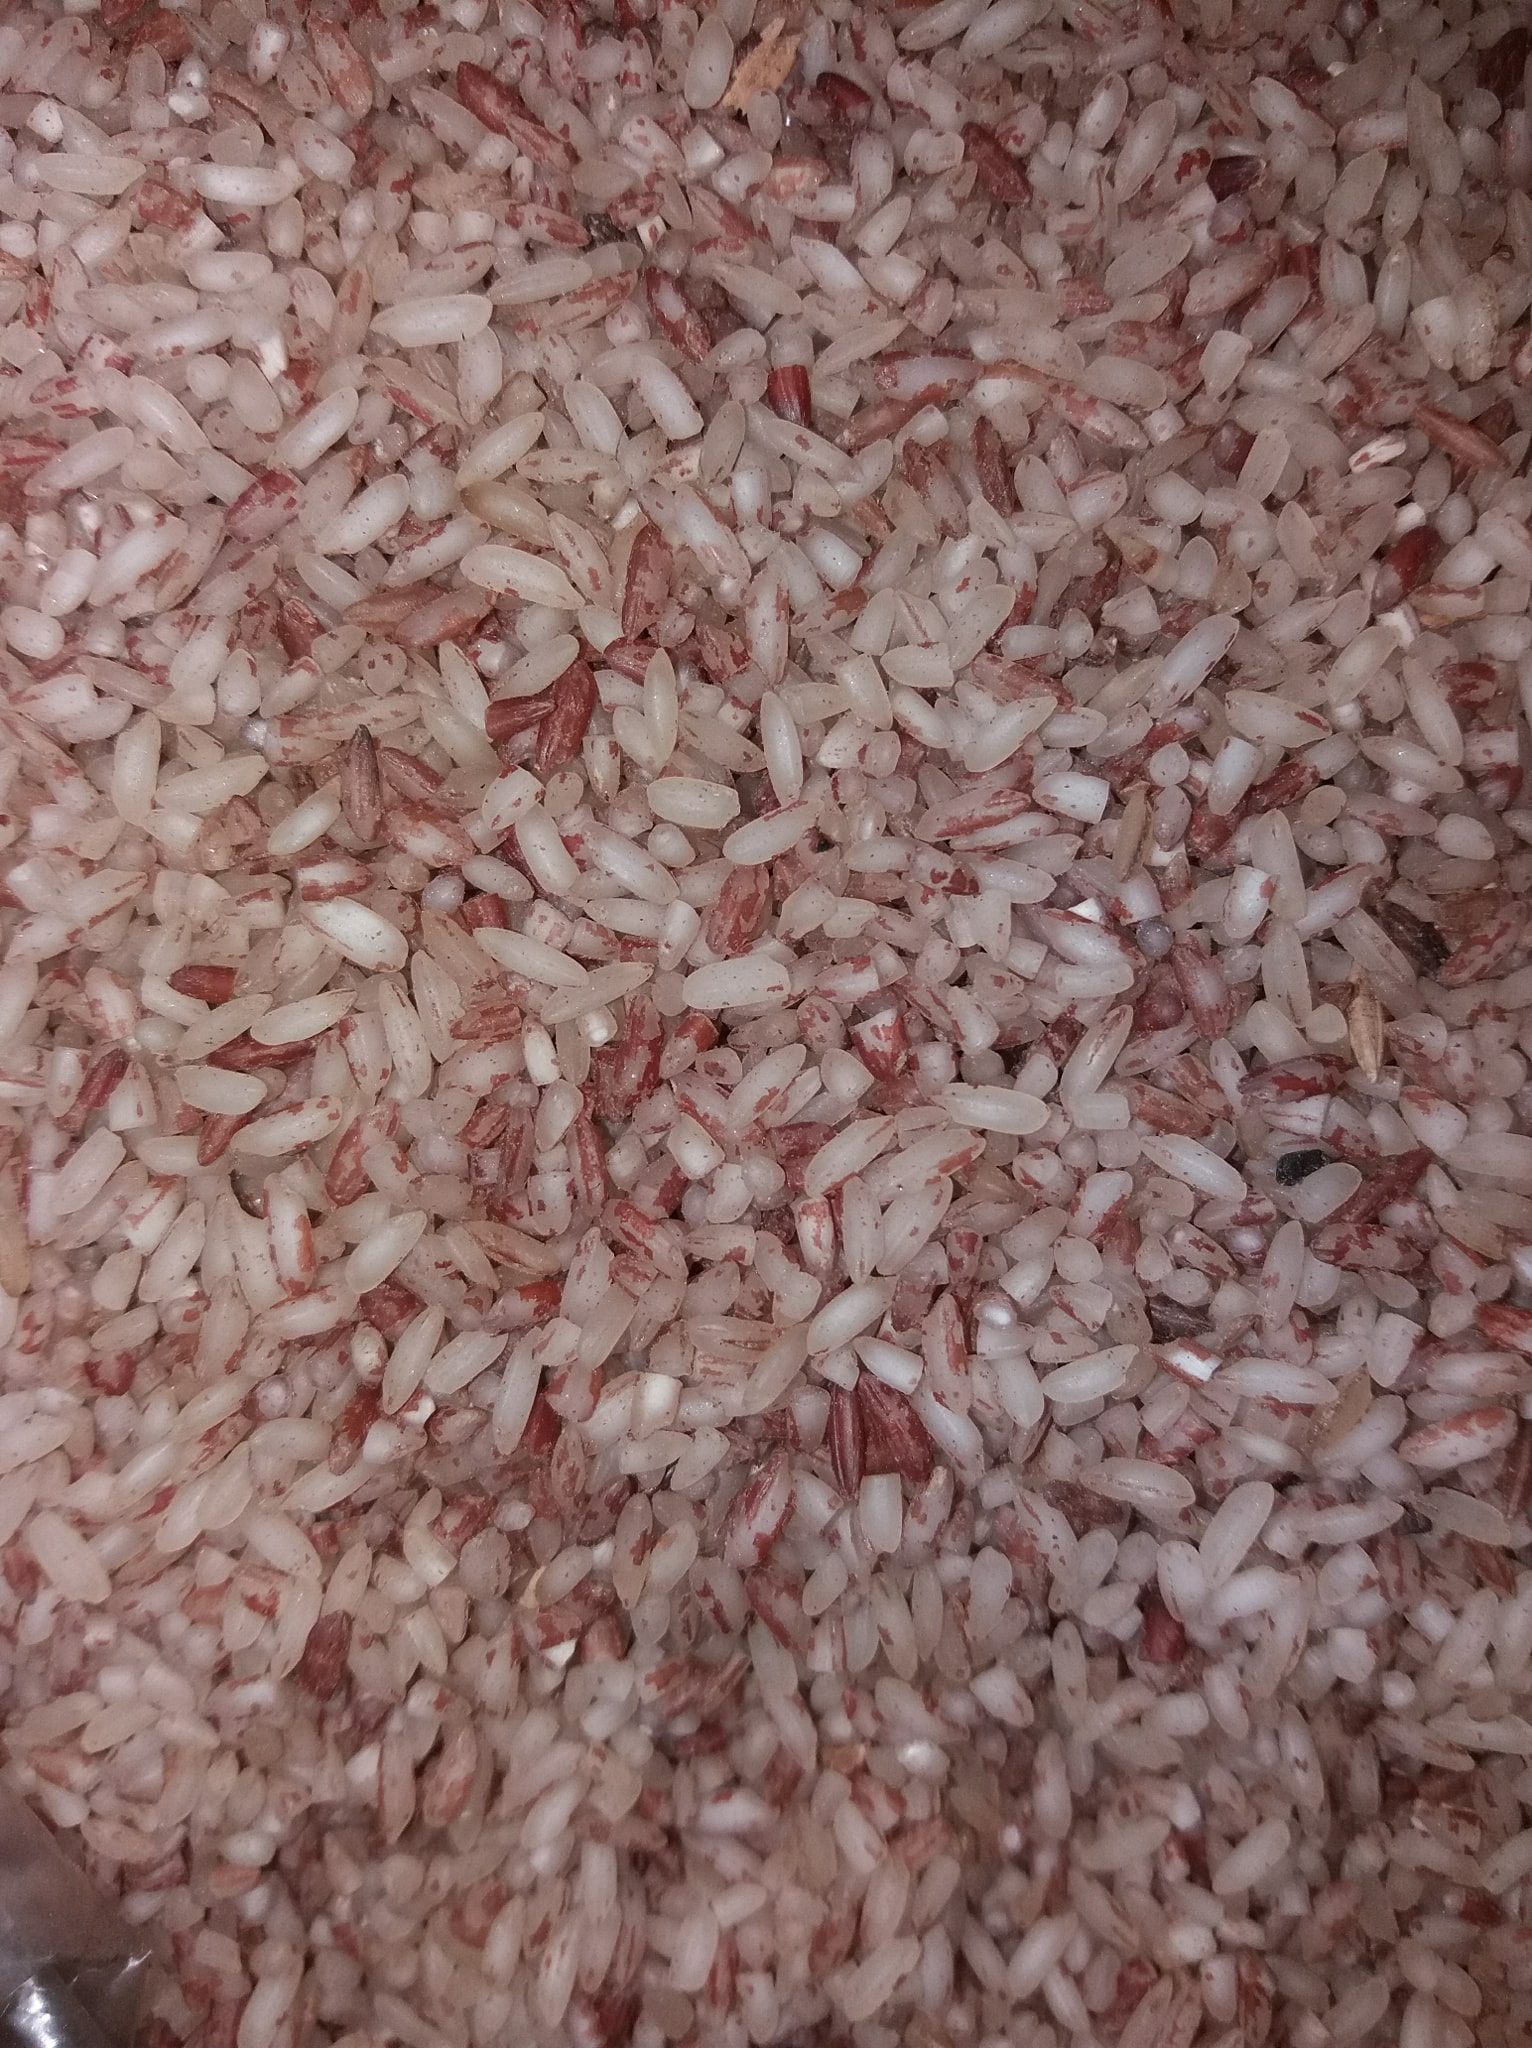 Is Brown rice easy to digest